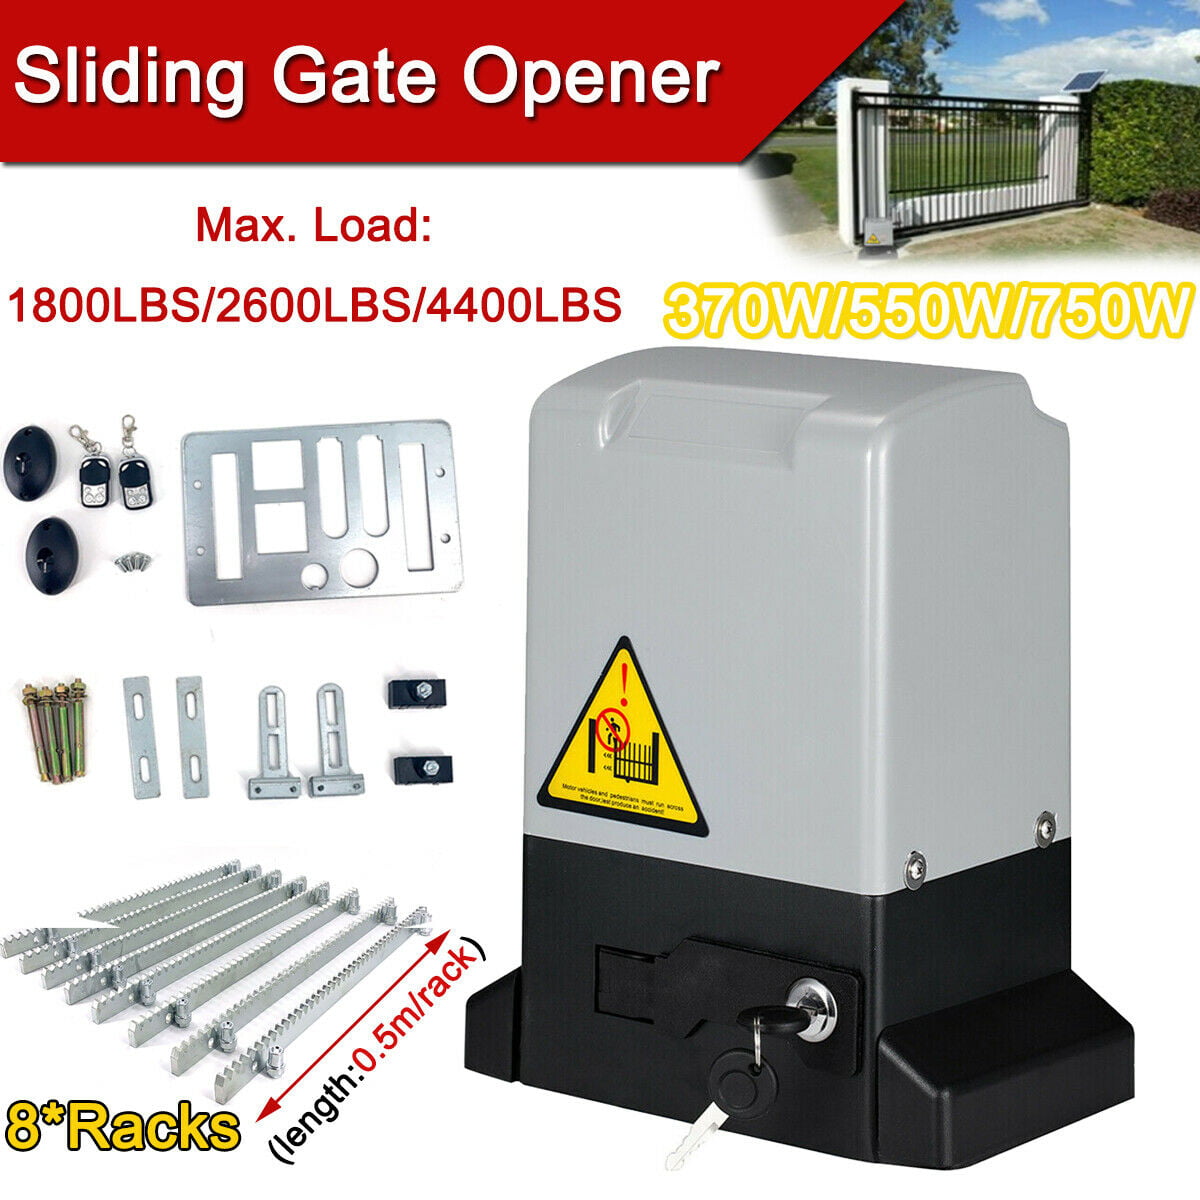 Electric sliding gate opener AC motor automatic gate with 4m rack and 2 remotes